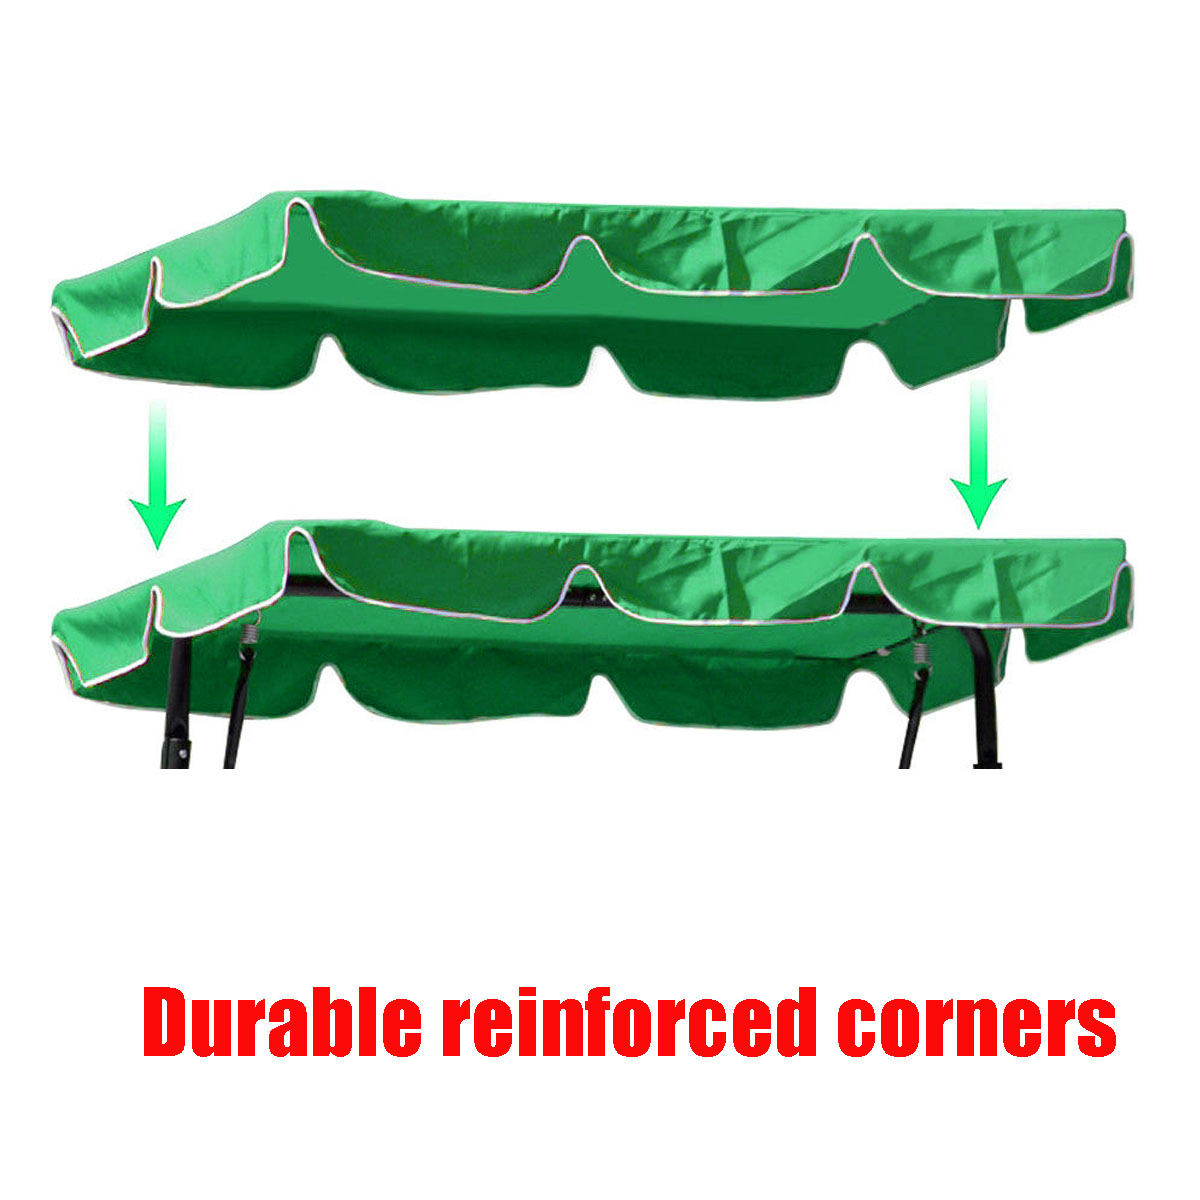 Summer Waterproof Top Cover Canopy Replacement Shade for Garden Courtyard Outdoor Swing Chair Hammock Canopy Swing Chair Awning